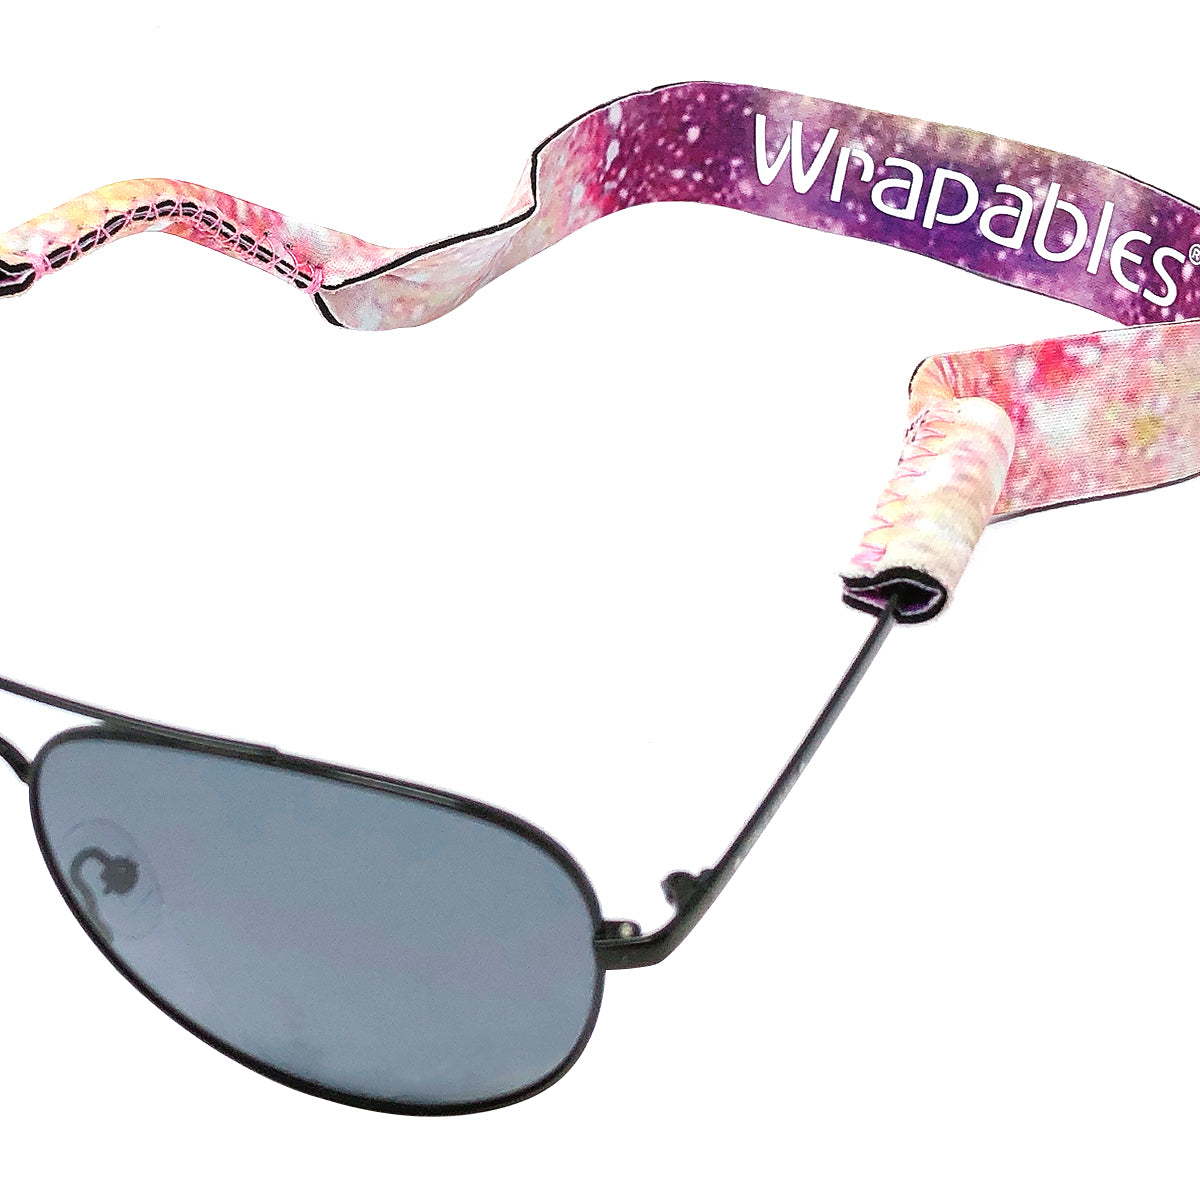 Wrapables Adjustable Eyewear Retainer, Sunglass Strap with Neoprene Floating Material for Sports and Outdoors (Set of 3)